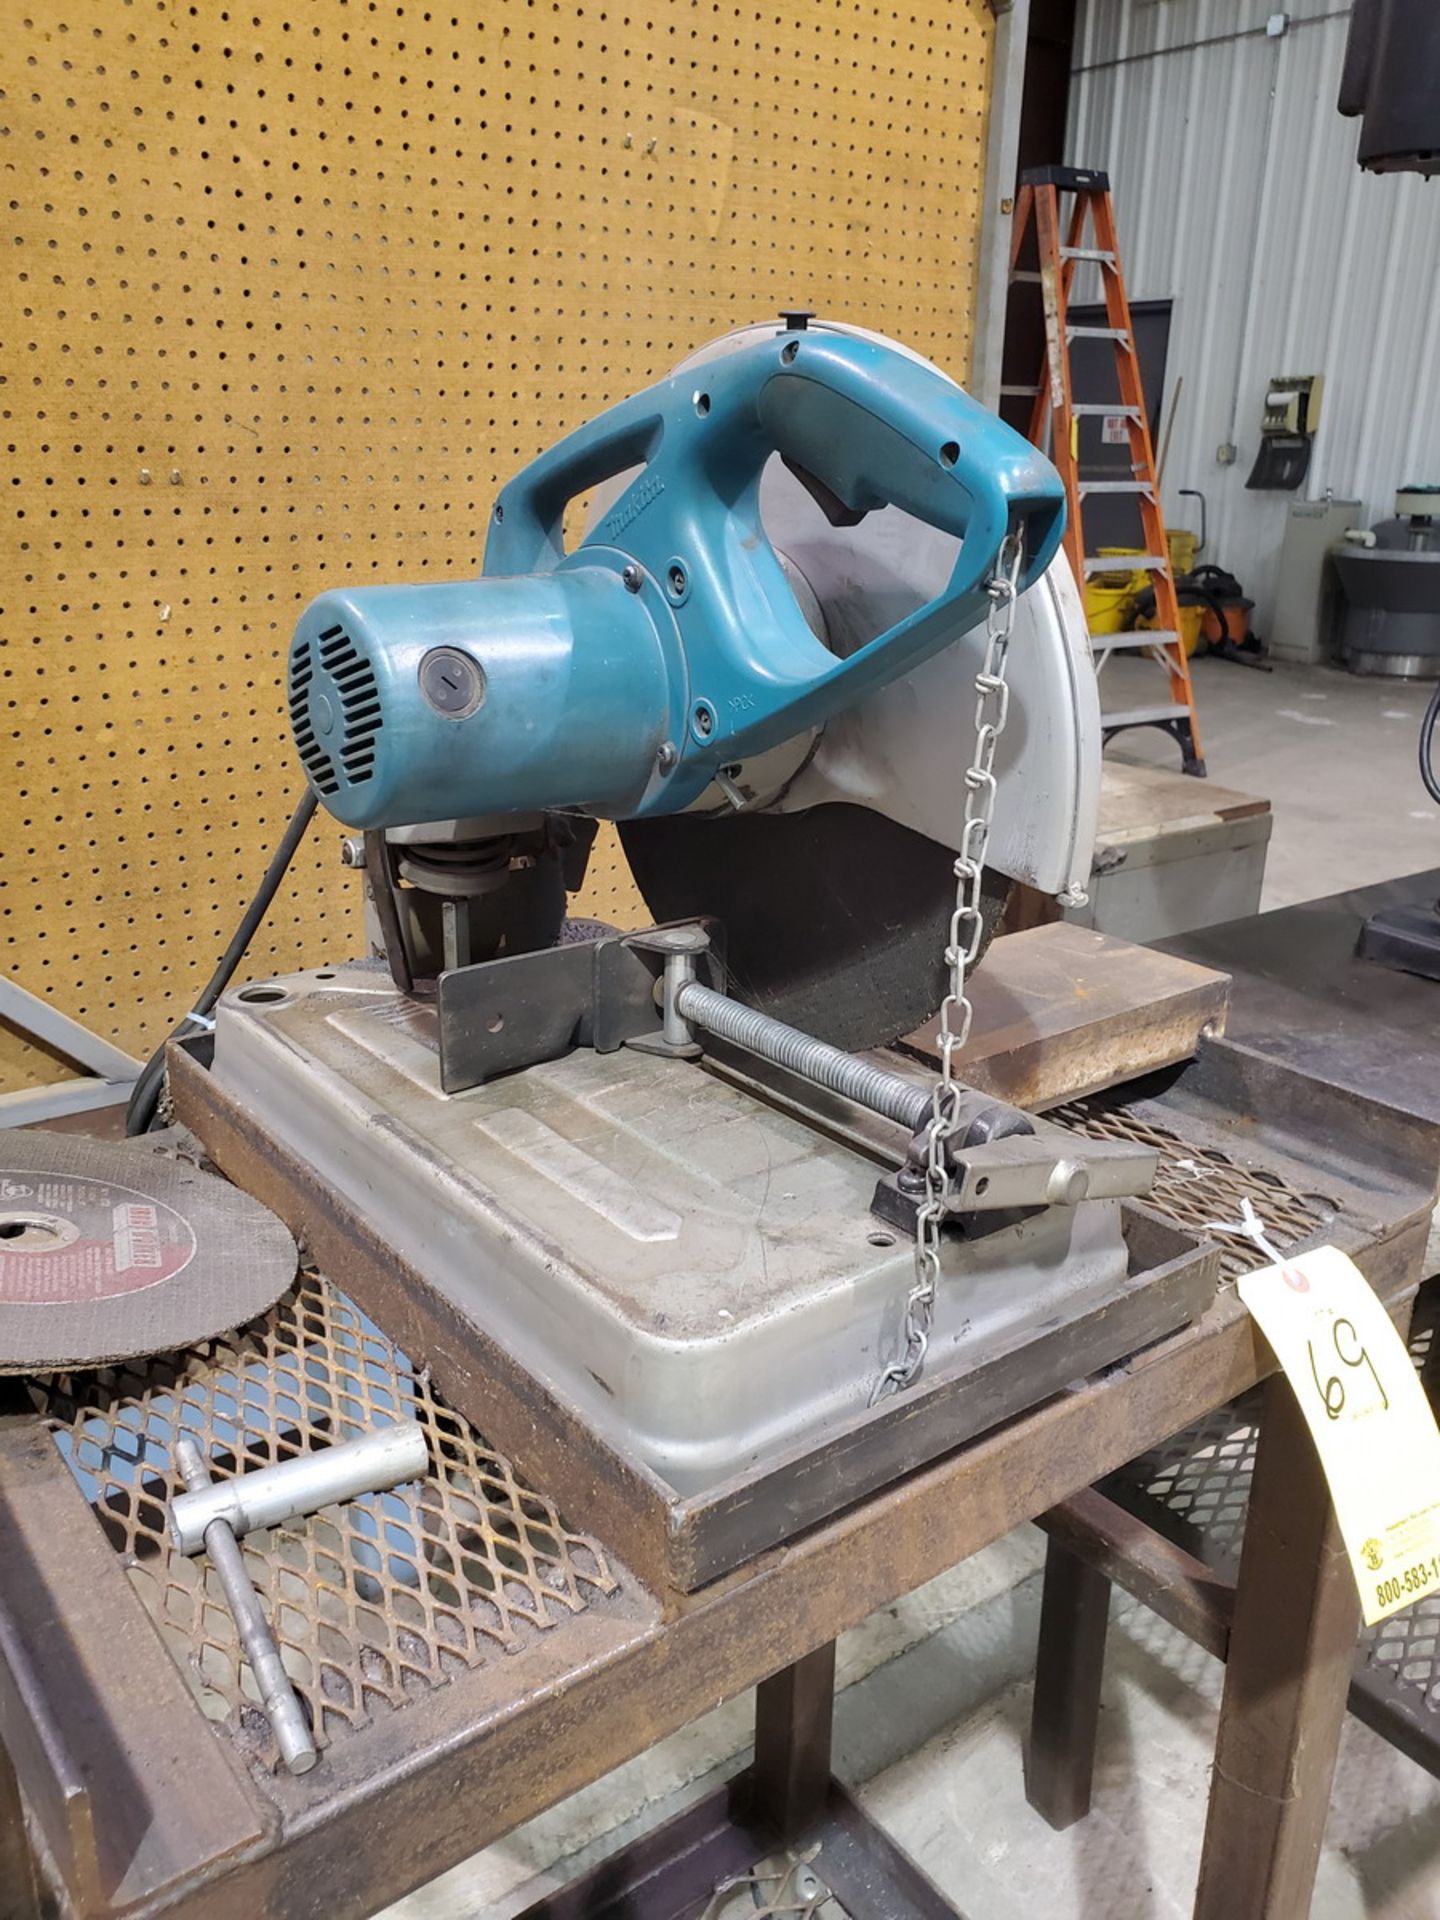 Makita 14" Cut-Off Saw 50/60HZ, 120V, 3800RPM; W/ Rolling Cart - Image 2 of 5